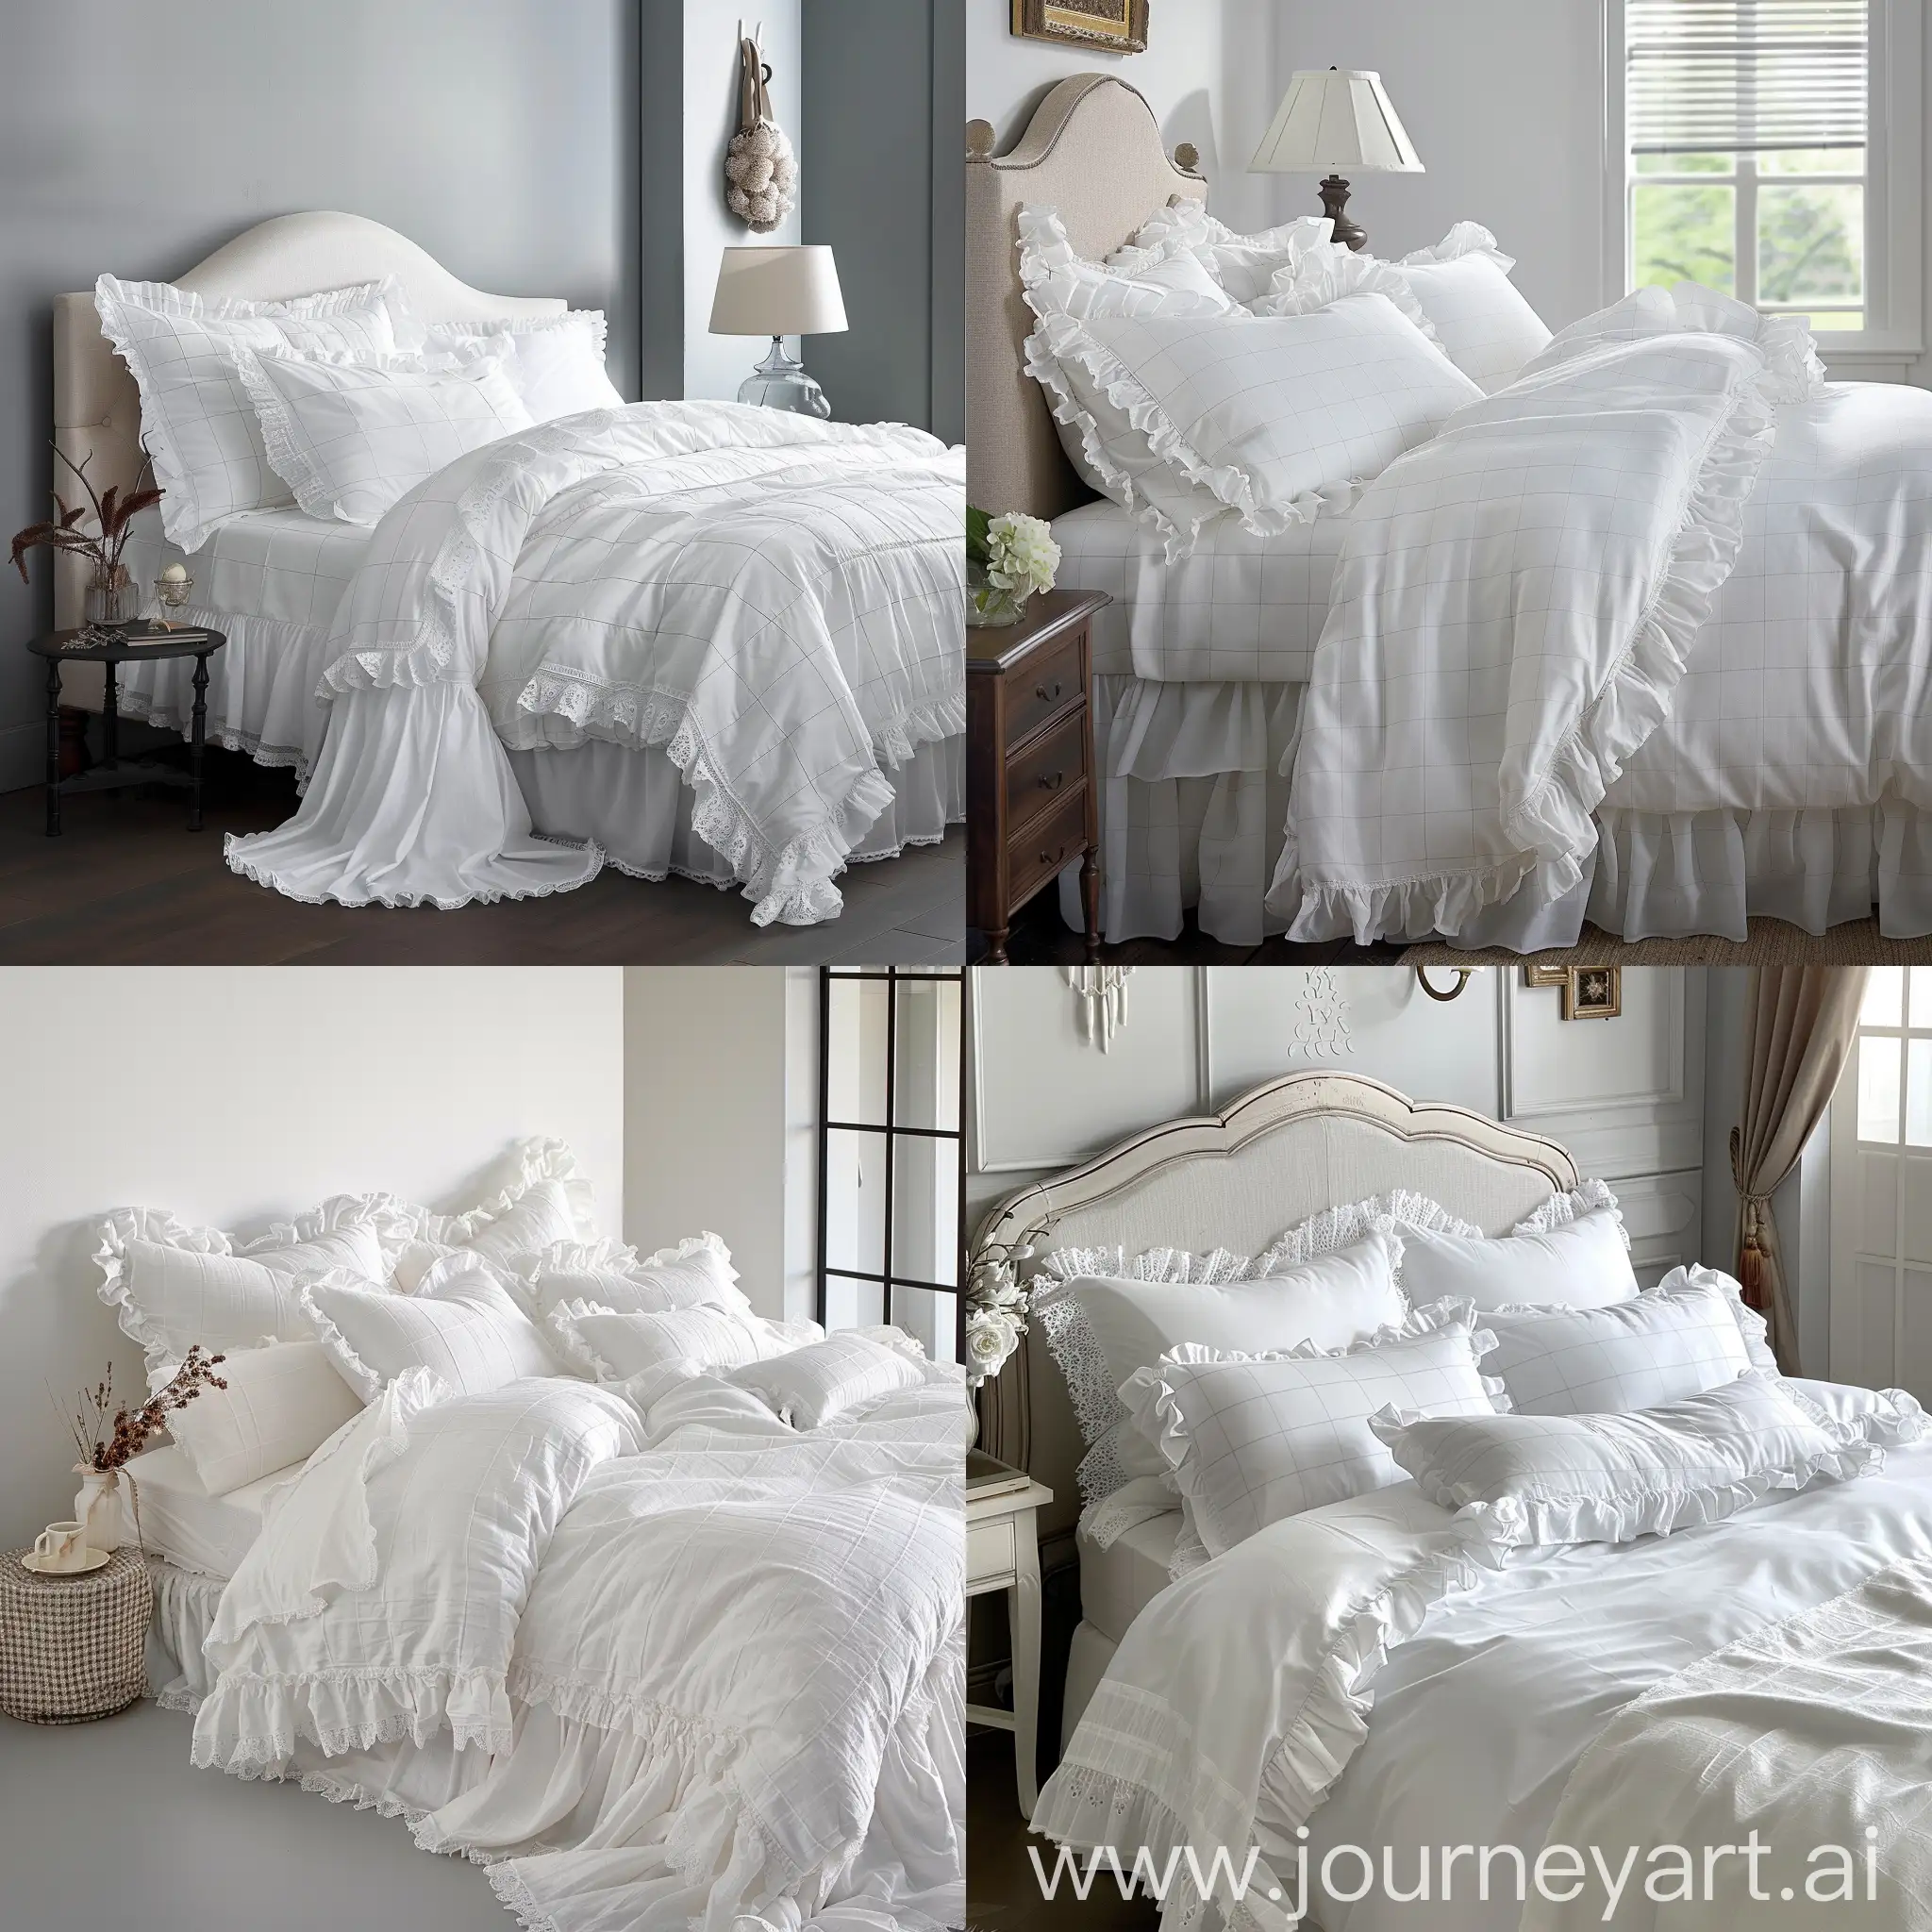 Explore an exquisite collection of white bedding, each piece emanating an aesthetic of ethereal romance. This is more than just a bedding set; it is a longing for a beautiful life, with each piece meticulously designed to blend tradition with modernity. The bed skirt, with its delicate lace edges, showcases unparalleled elegance and charm. Within the four-piece set, the duvet cover and sheets are made from soft fabric adorned with exquisite plaid, simple yet stylish. The pillowcase features a ruffled edge, adding a touch of softness and finesse that captivates at first glance. Each product represents a pursuit and interpretation of beauty, aiming to bring a breath of freshness and romance to your bedroom space.